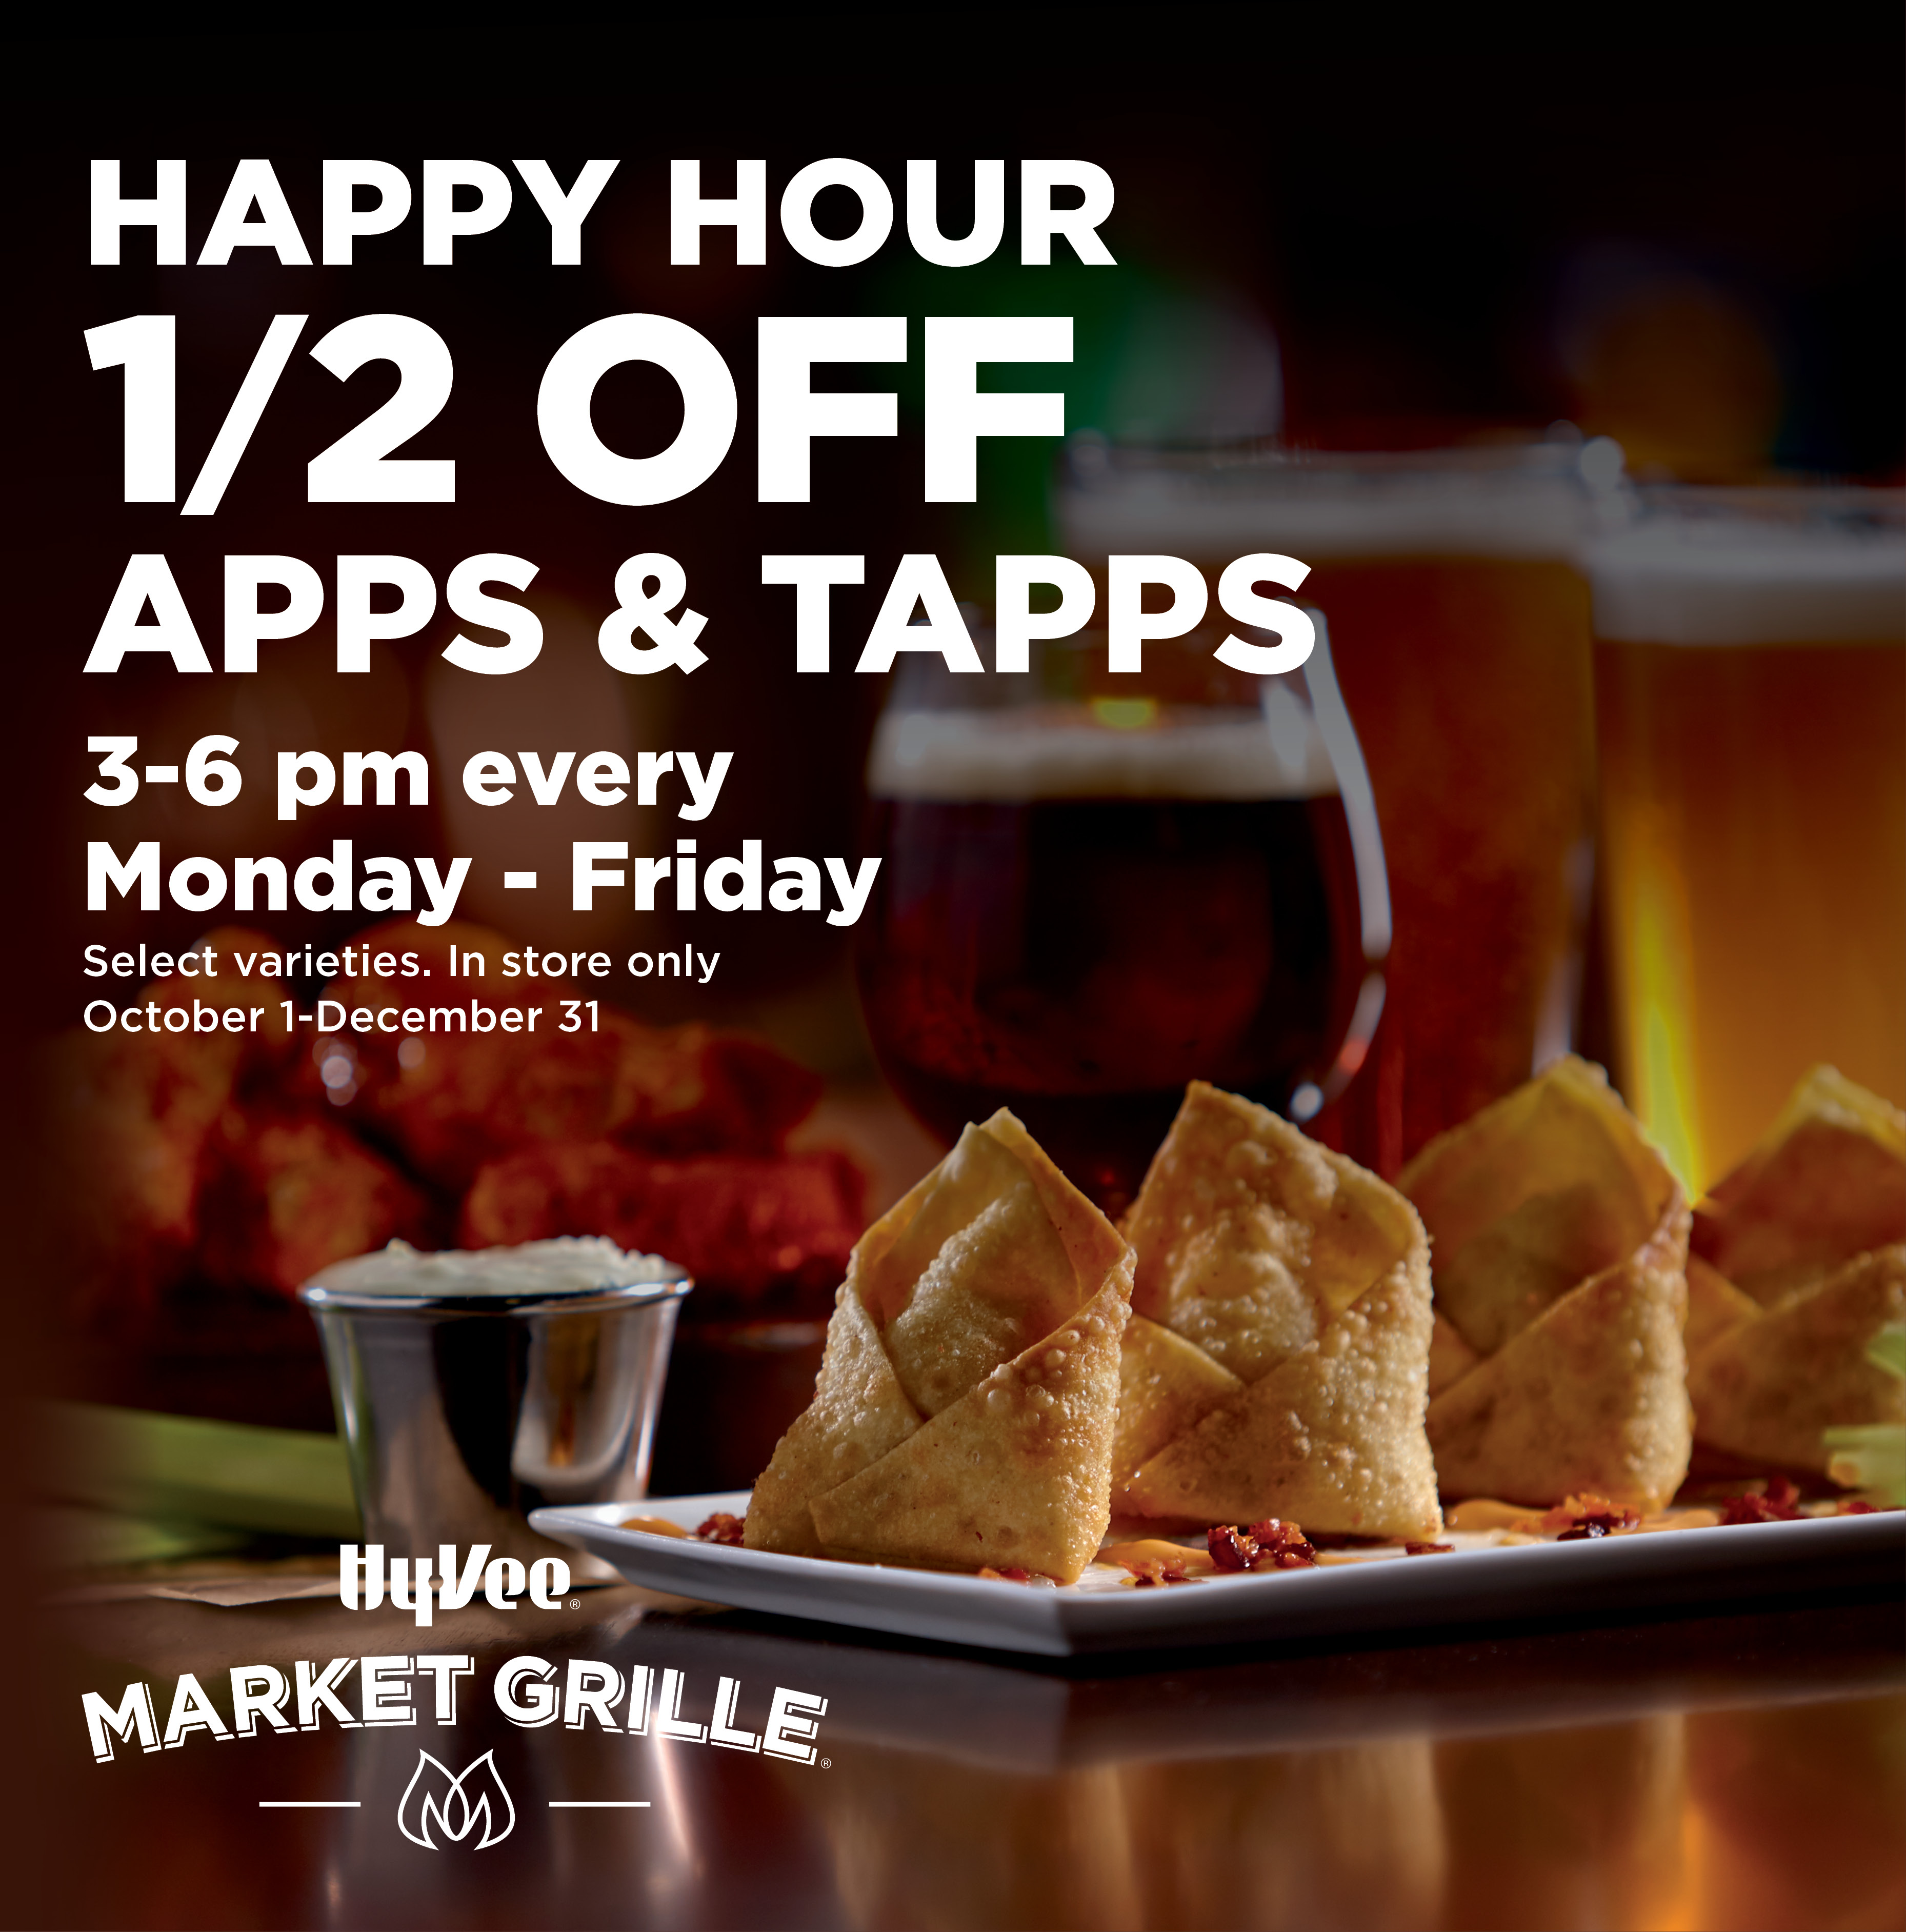 Half off apps & taps at Hy-Vee Market grille 3-6pm